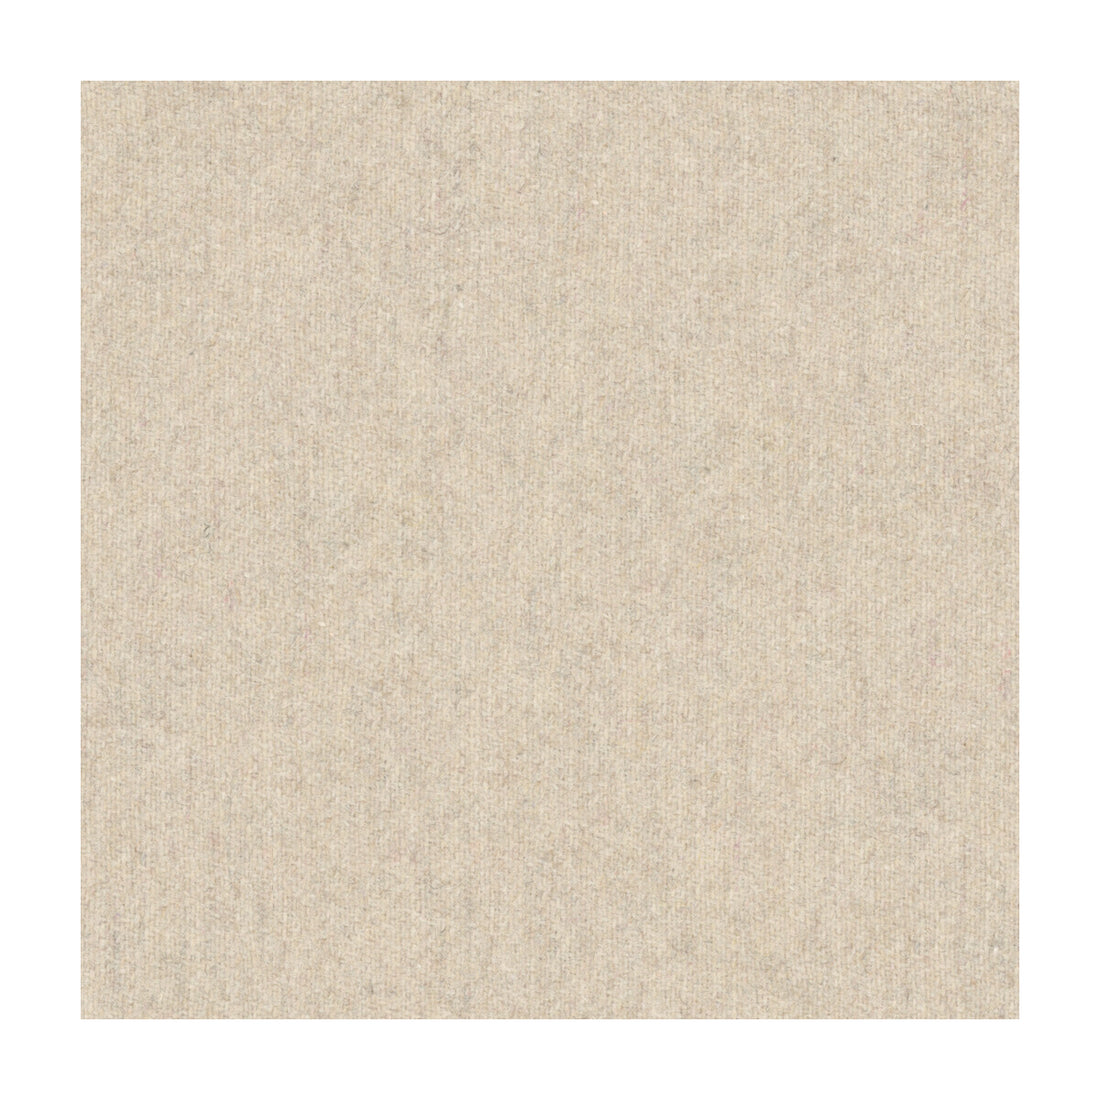 Jefferson Wool fabric in flax color - pattern 34397.1116.0 - by Kravet Contract